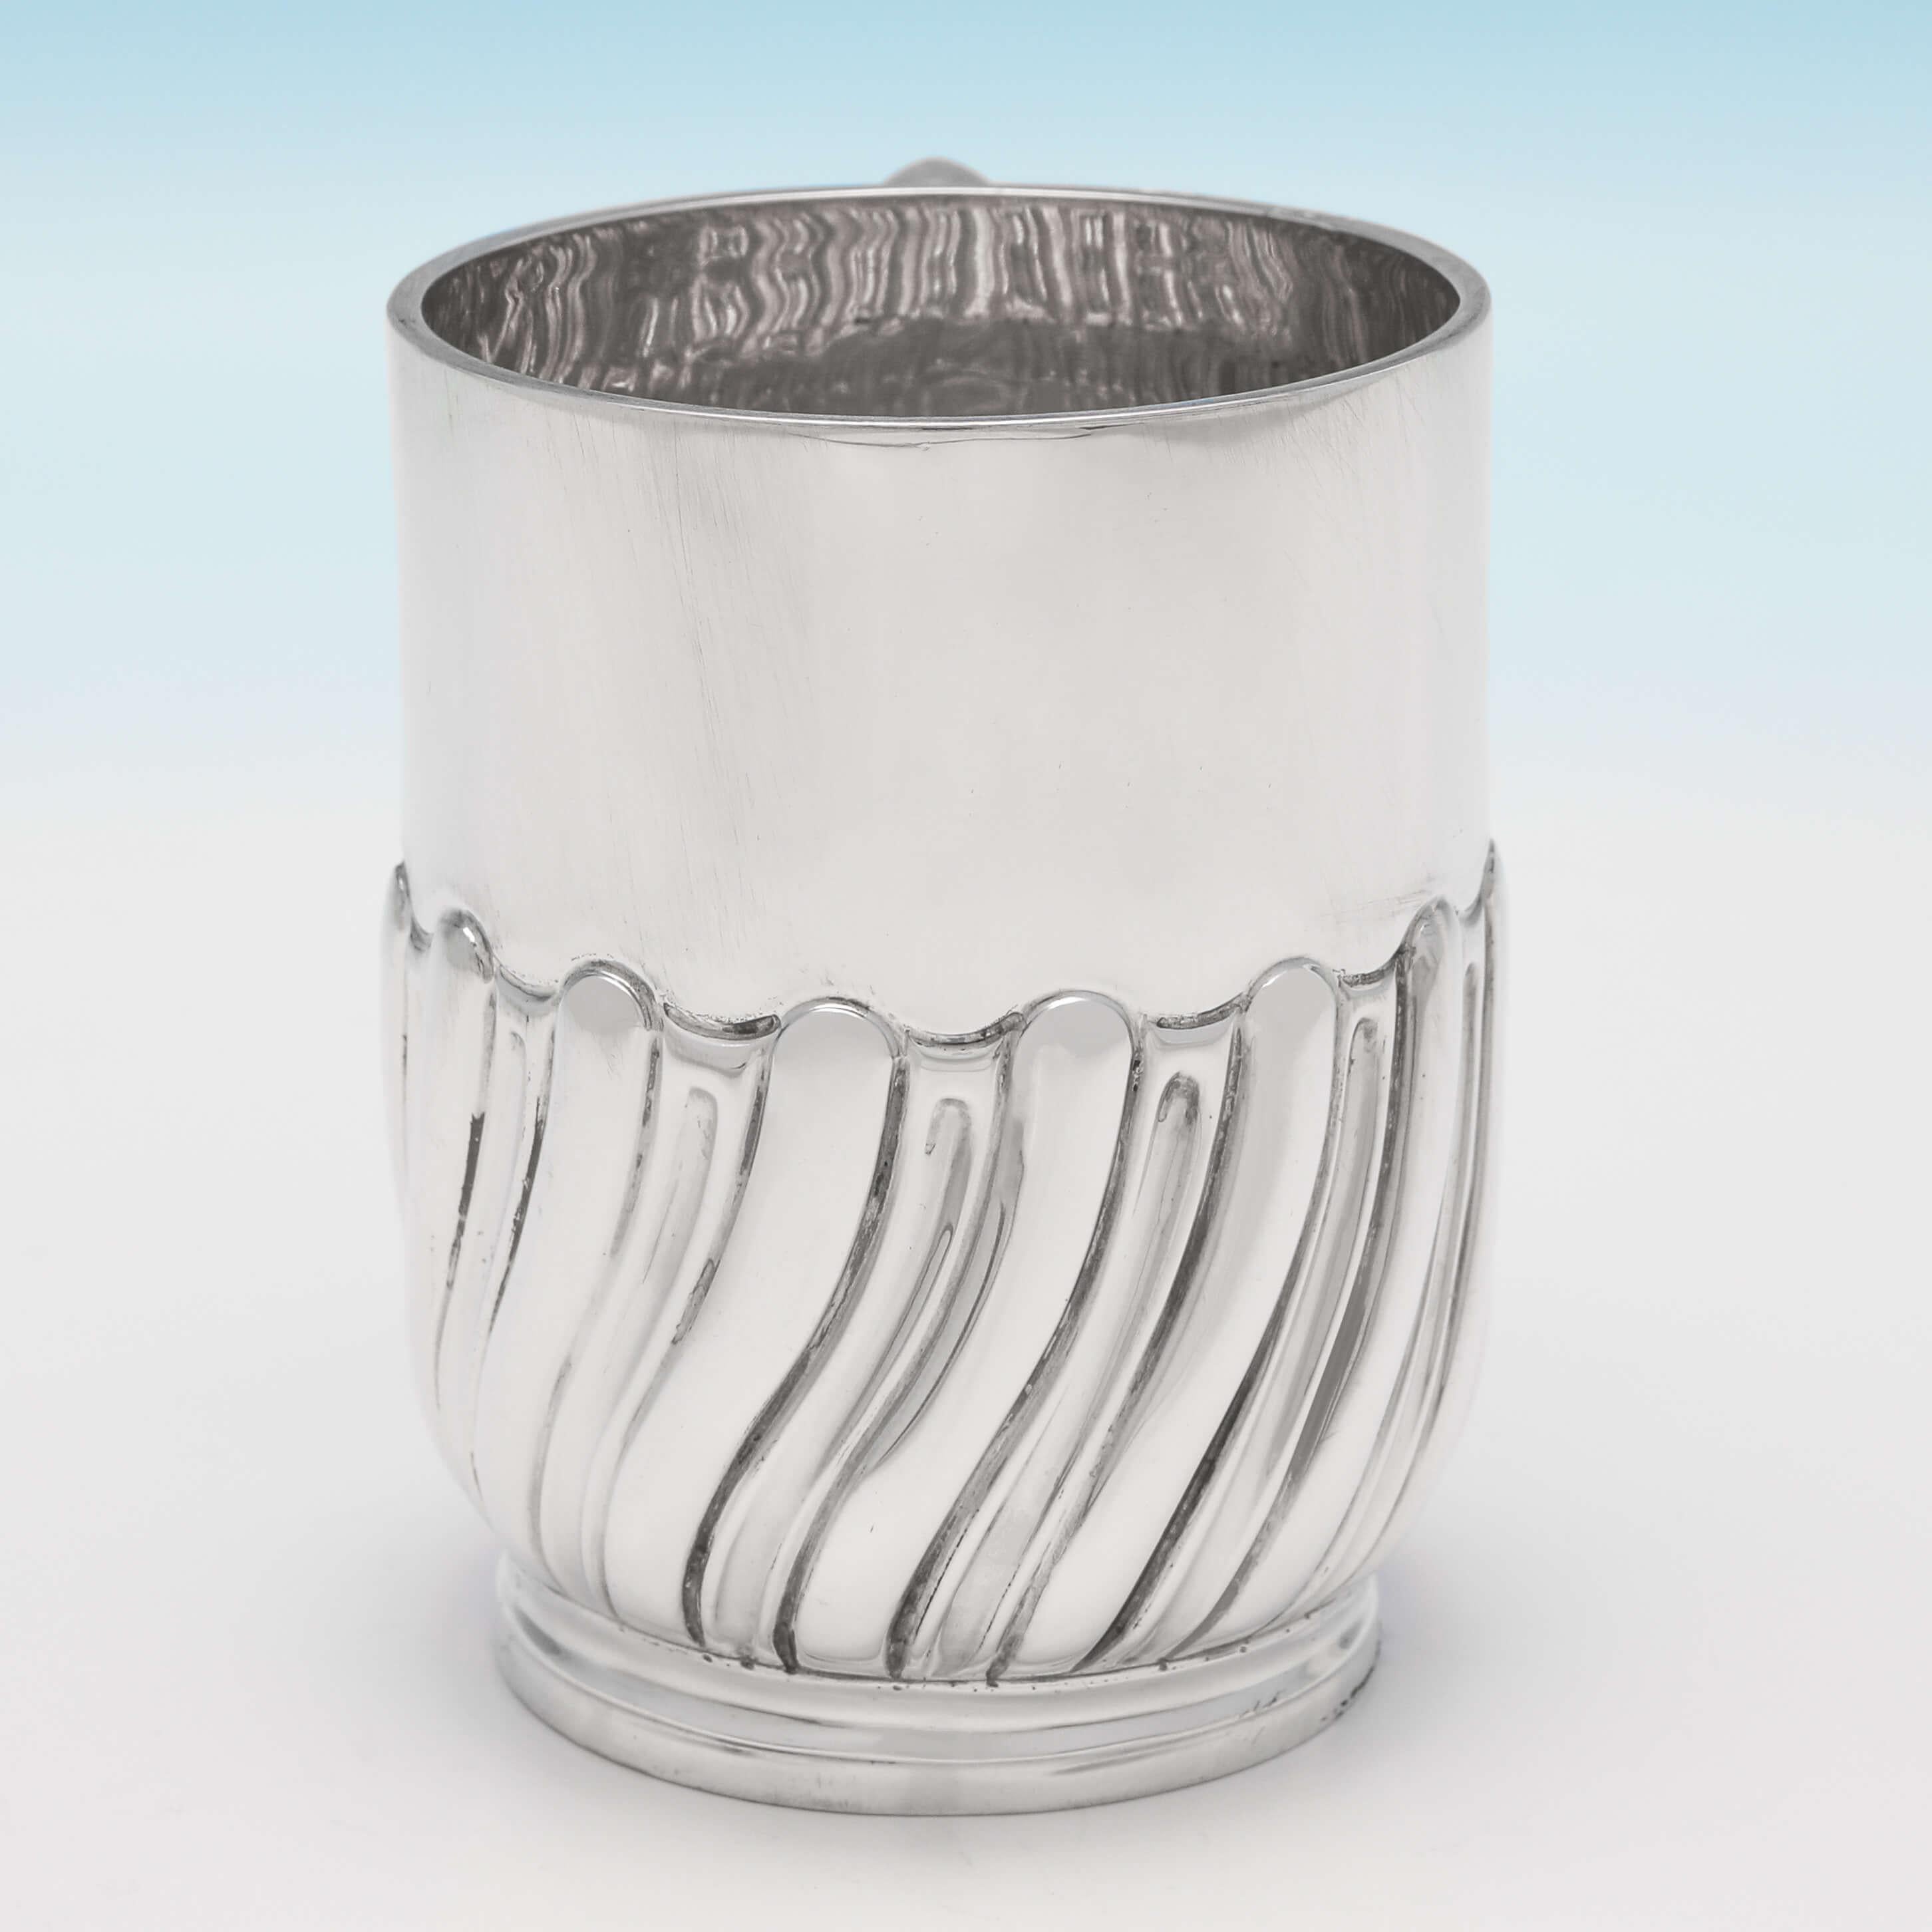 Hallmarked in London in 1898 by Jackson & Fullerton, this handsome, Victorian, antique sterling silver Christening mug, features swirled half fluted decoration and a plain loop handle. The christening mug measures 3.25